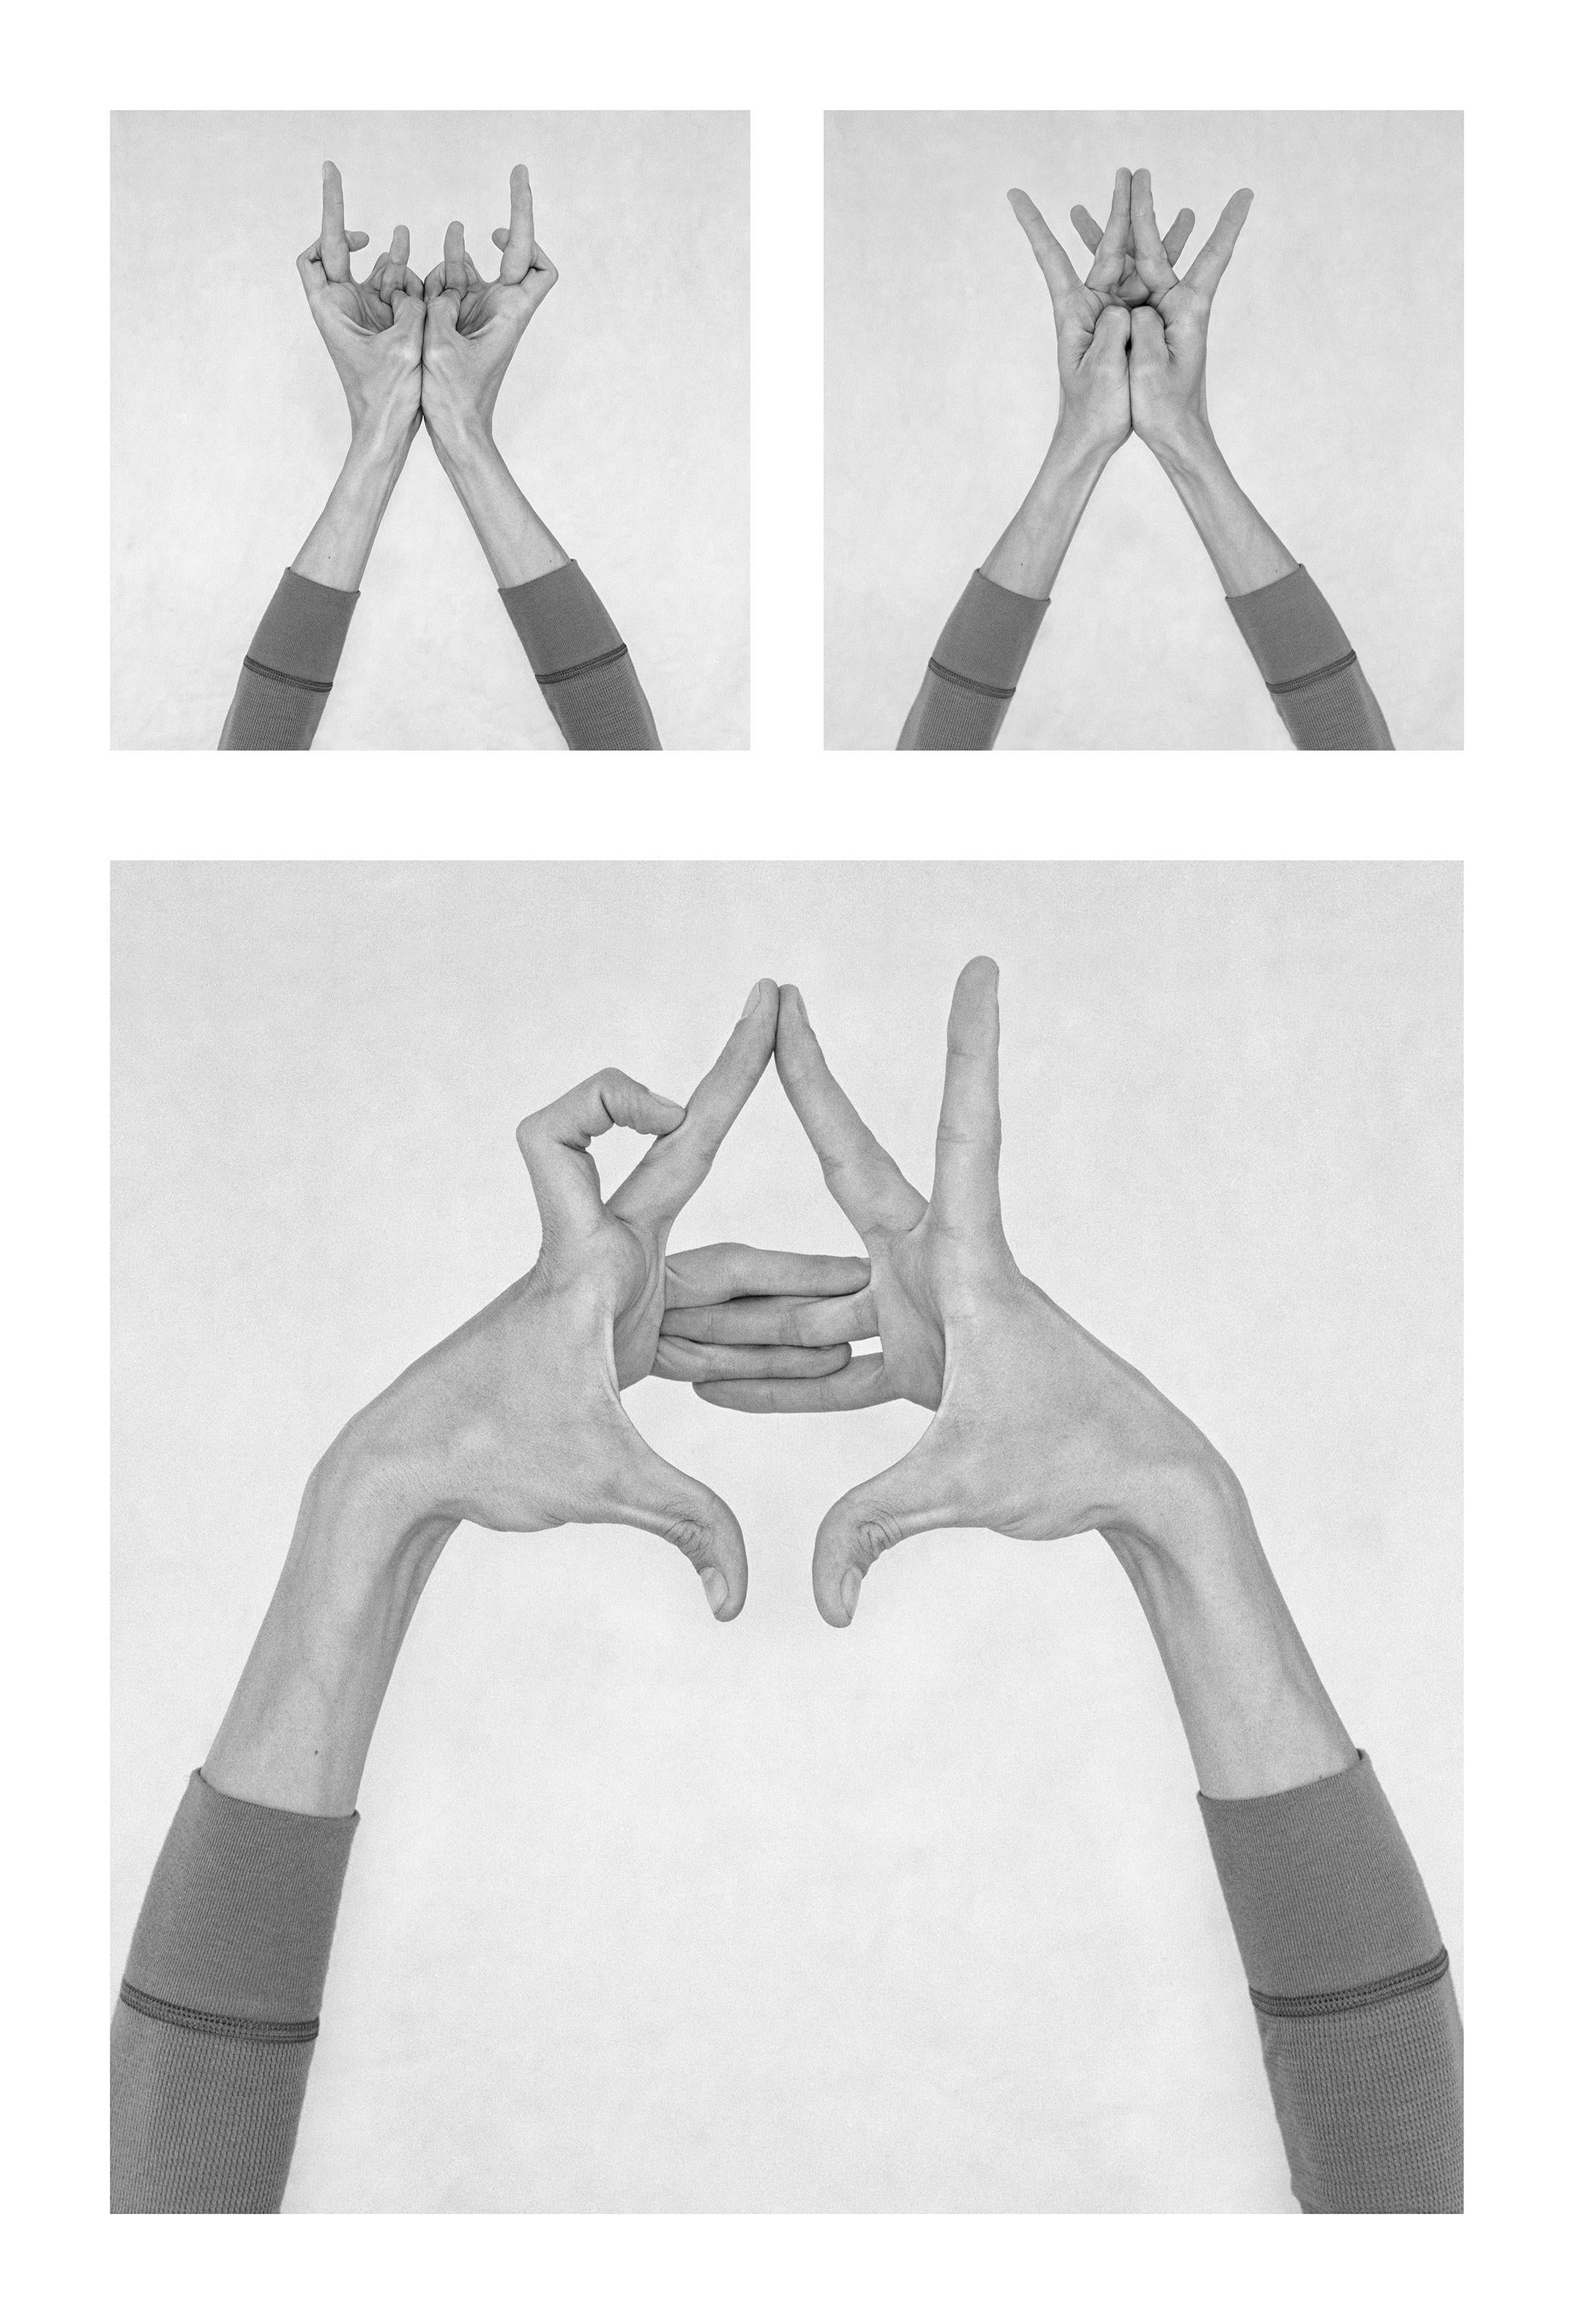 Nico Baixas / Gos-com-fuig Black and White Photograph - Untitled XII, XXXVII, and Untitled XXVI. Hands. From the Series Chiromorphose